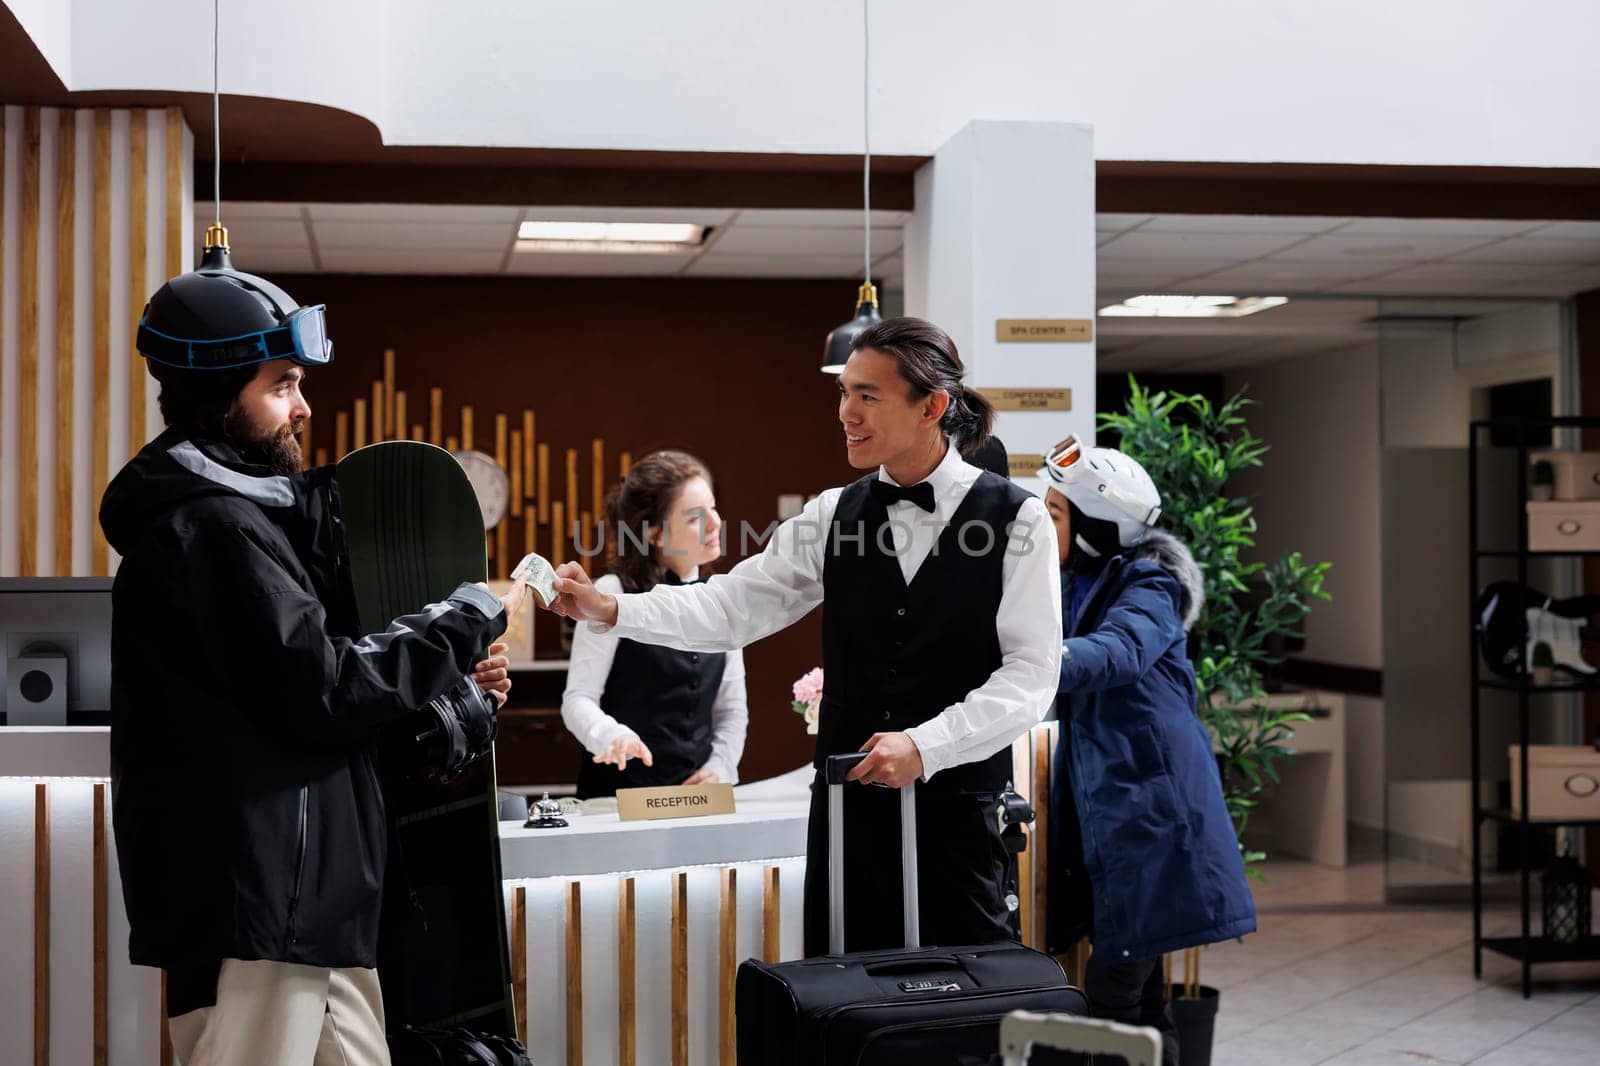 Tourists check in at ski mountain resort with luggage and snowboard equipment. Receptionist assists with reservations, male guest wearing winter clothing gives cash tip to staff in hotel lobby.